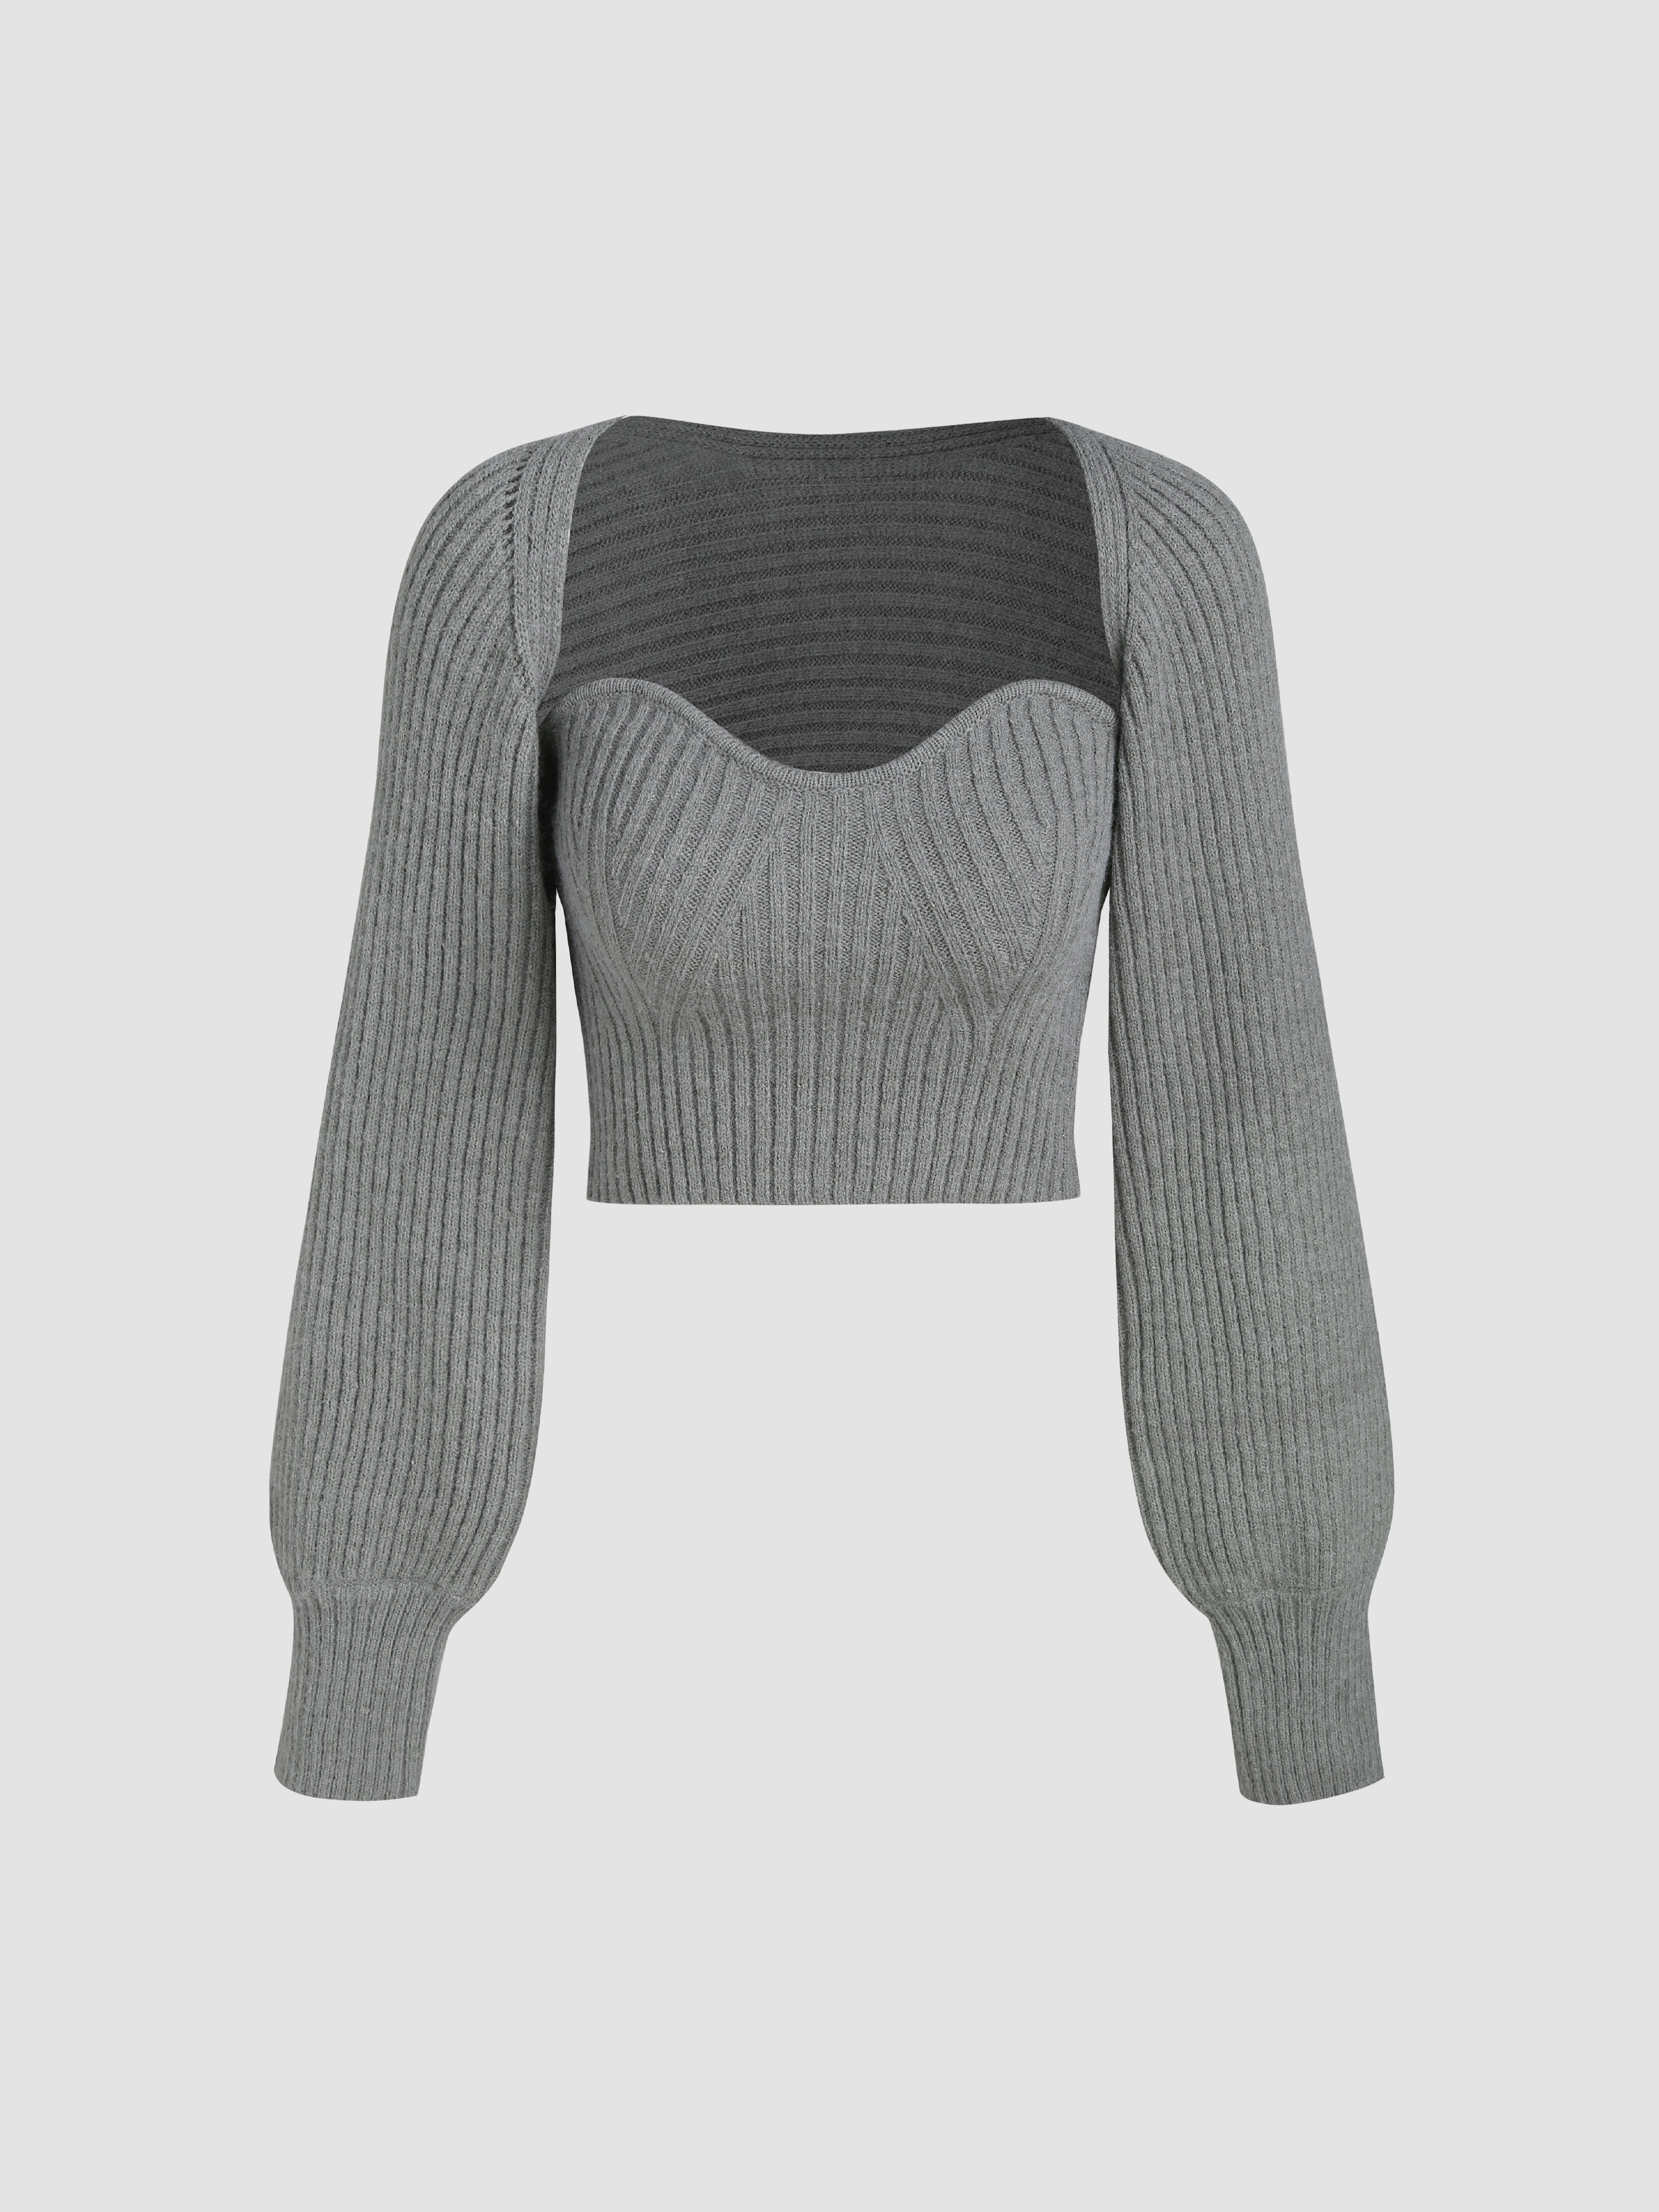 Two-Piece Rib Knit Long Sleeve Crop Top